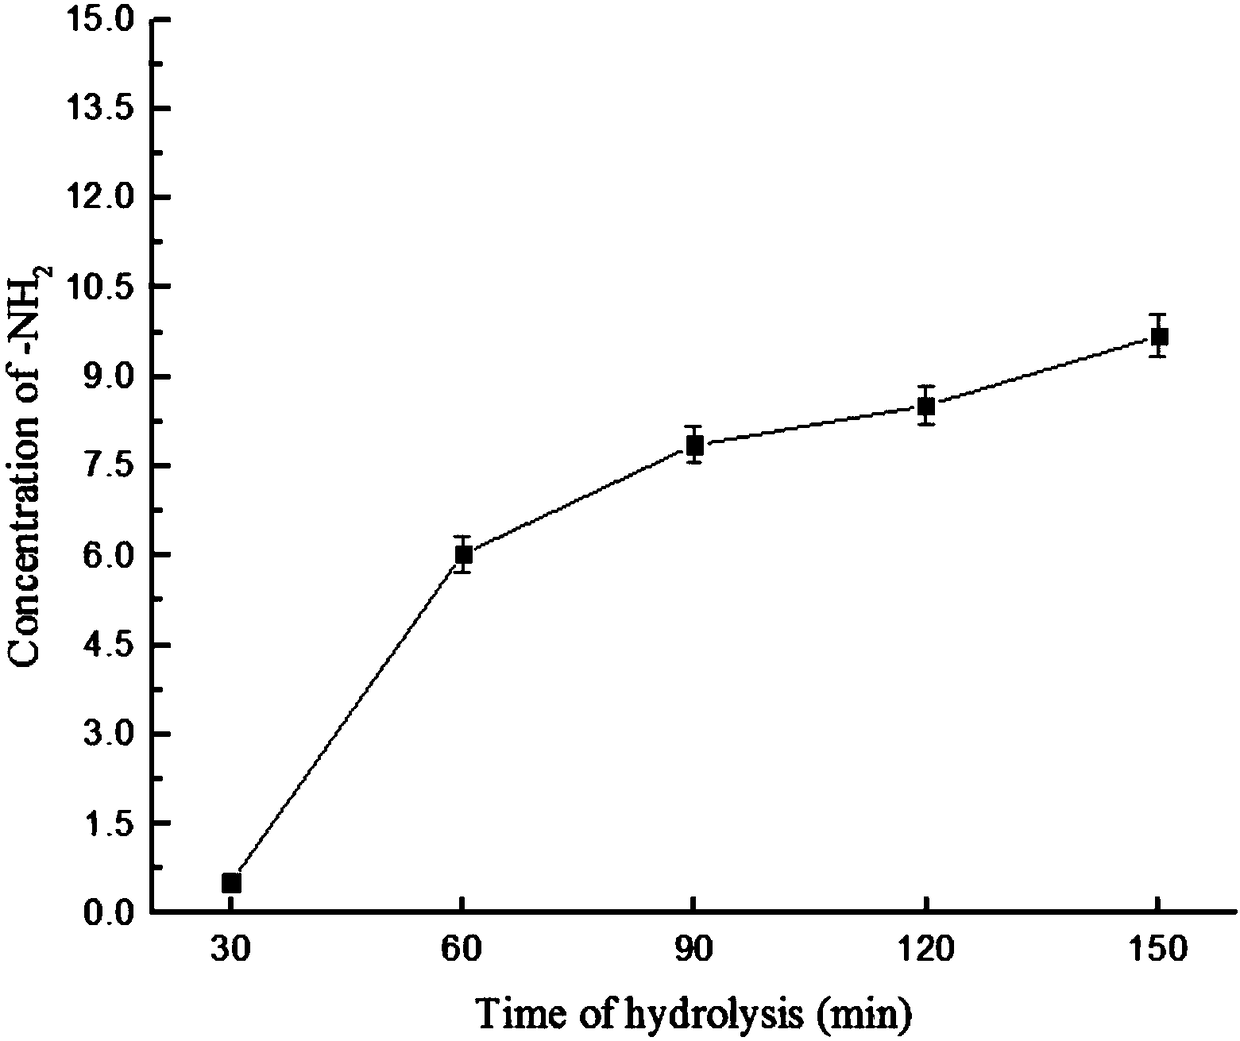 Process for preparing antioxidative peptide and antifreeze peptide through enzymatic hydrolysis of salmon collagens